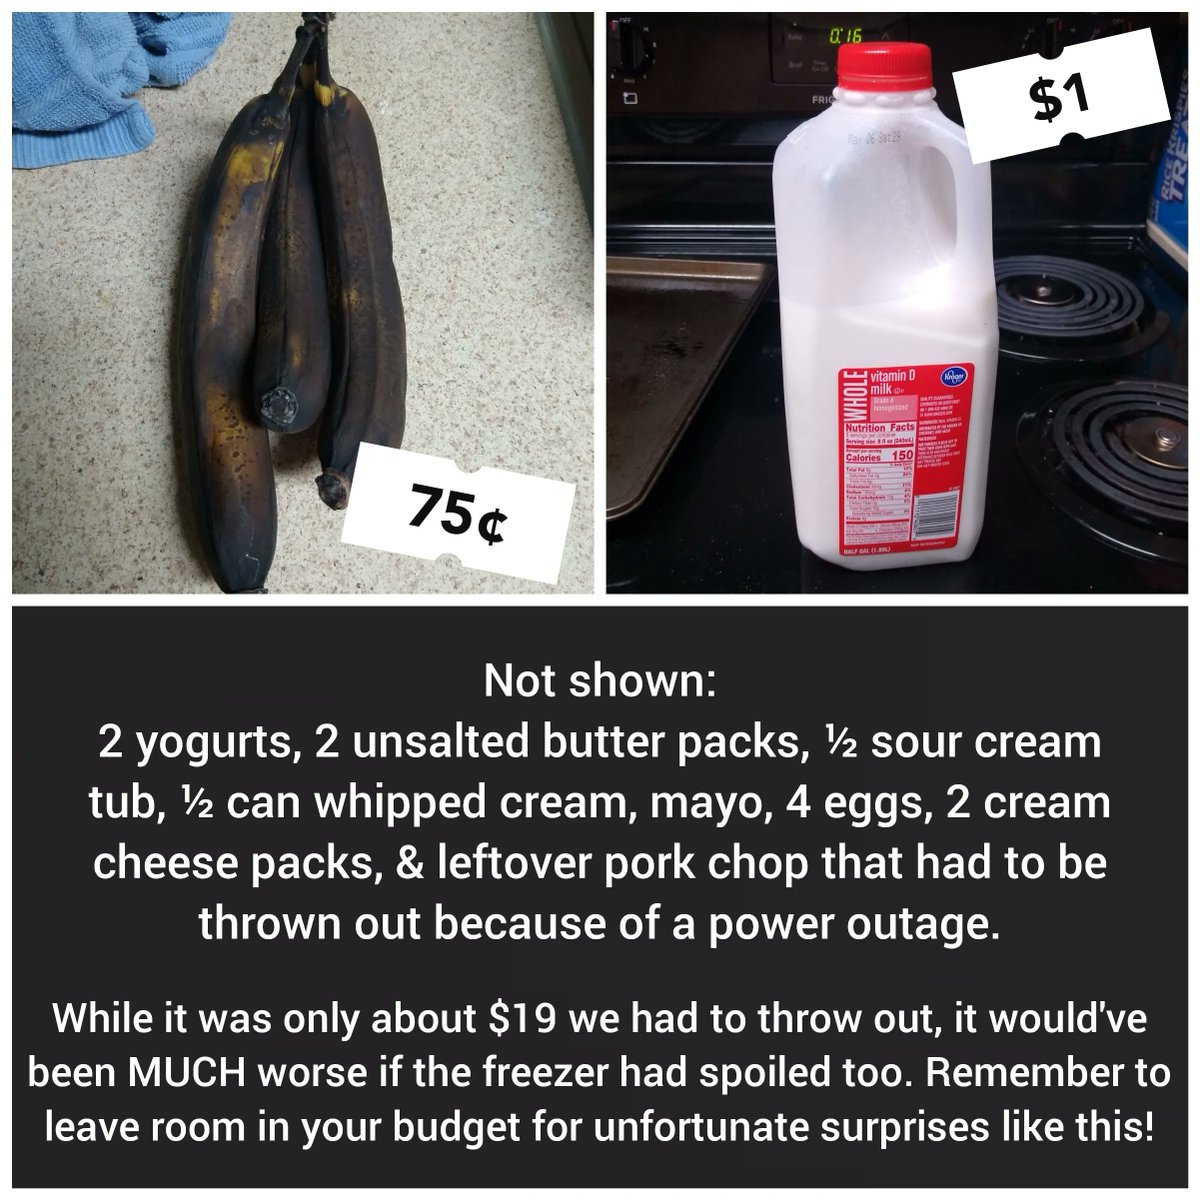 Happy #FoodWasteFriday 🙃

I should've made banana bread! But, aside from that, it wasn't a terrible week on a personal level.

We did have the fun surprise of power going out for half the day though, so we lost all the fridge perishables.

Remember to budget for surprises, too!